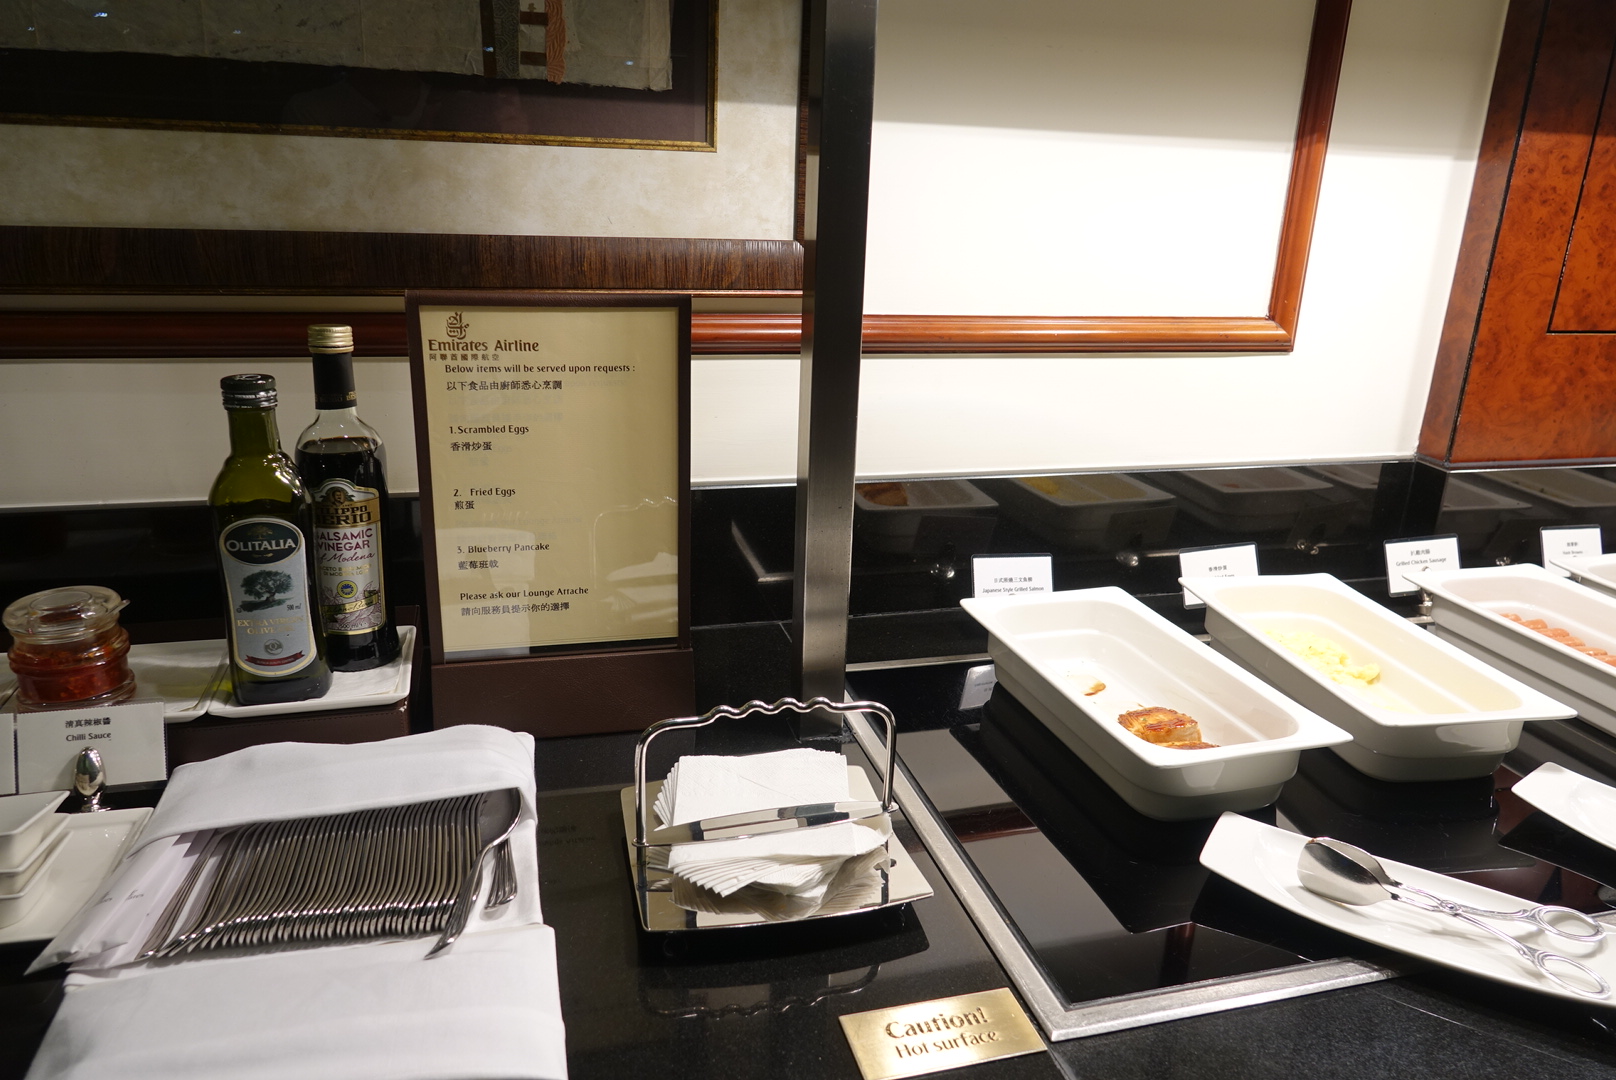 food in a buffet with a menu and bottles